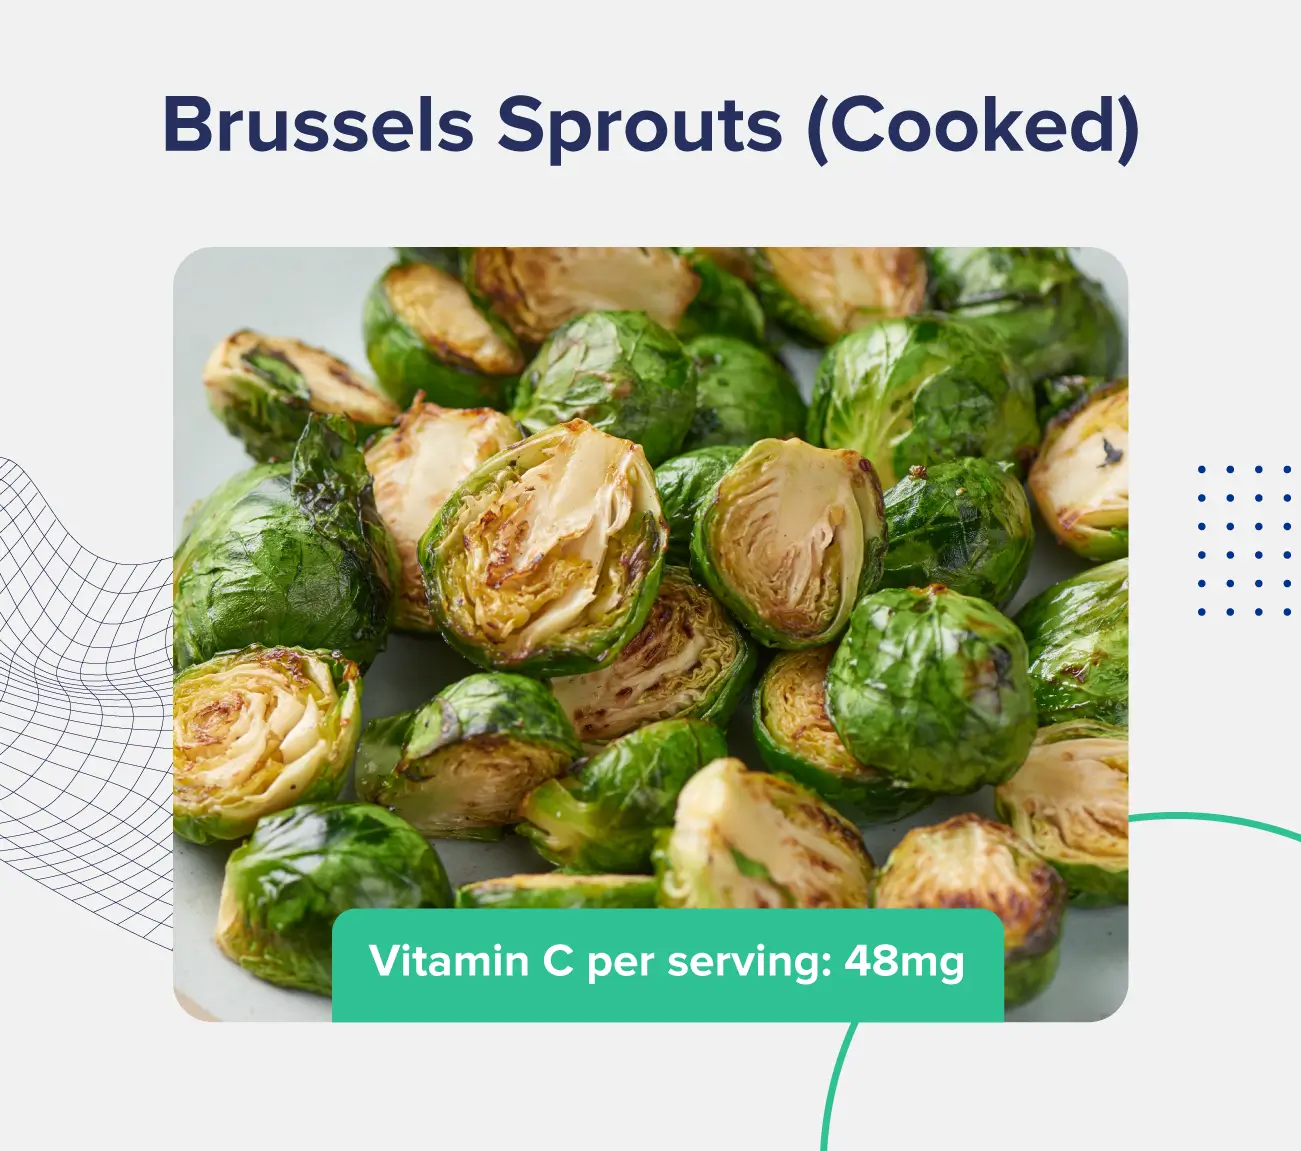 A graphic entitled "brussels sprouts (cooked)" depicting an assortment of chopped brussels sprouts and listing the vitamin C content (48 milligrams per serving)